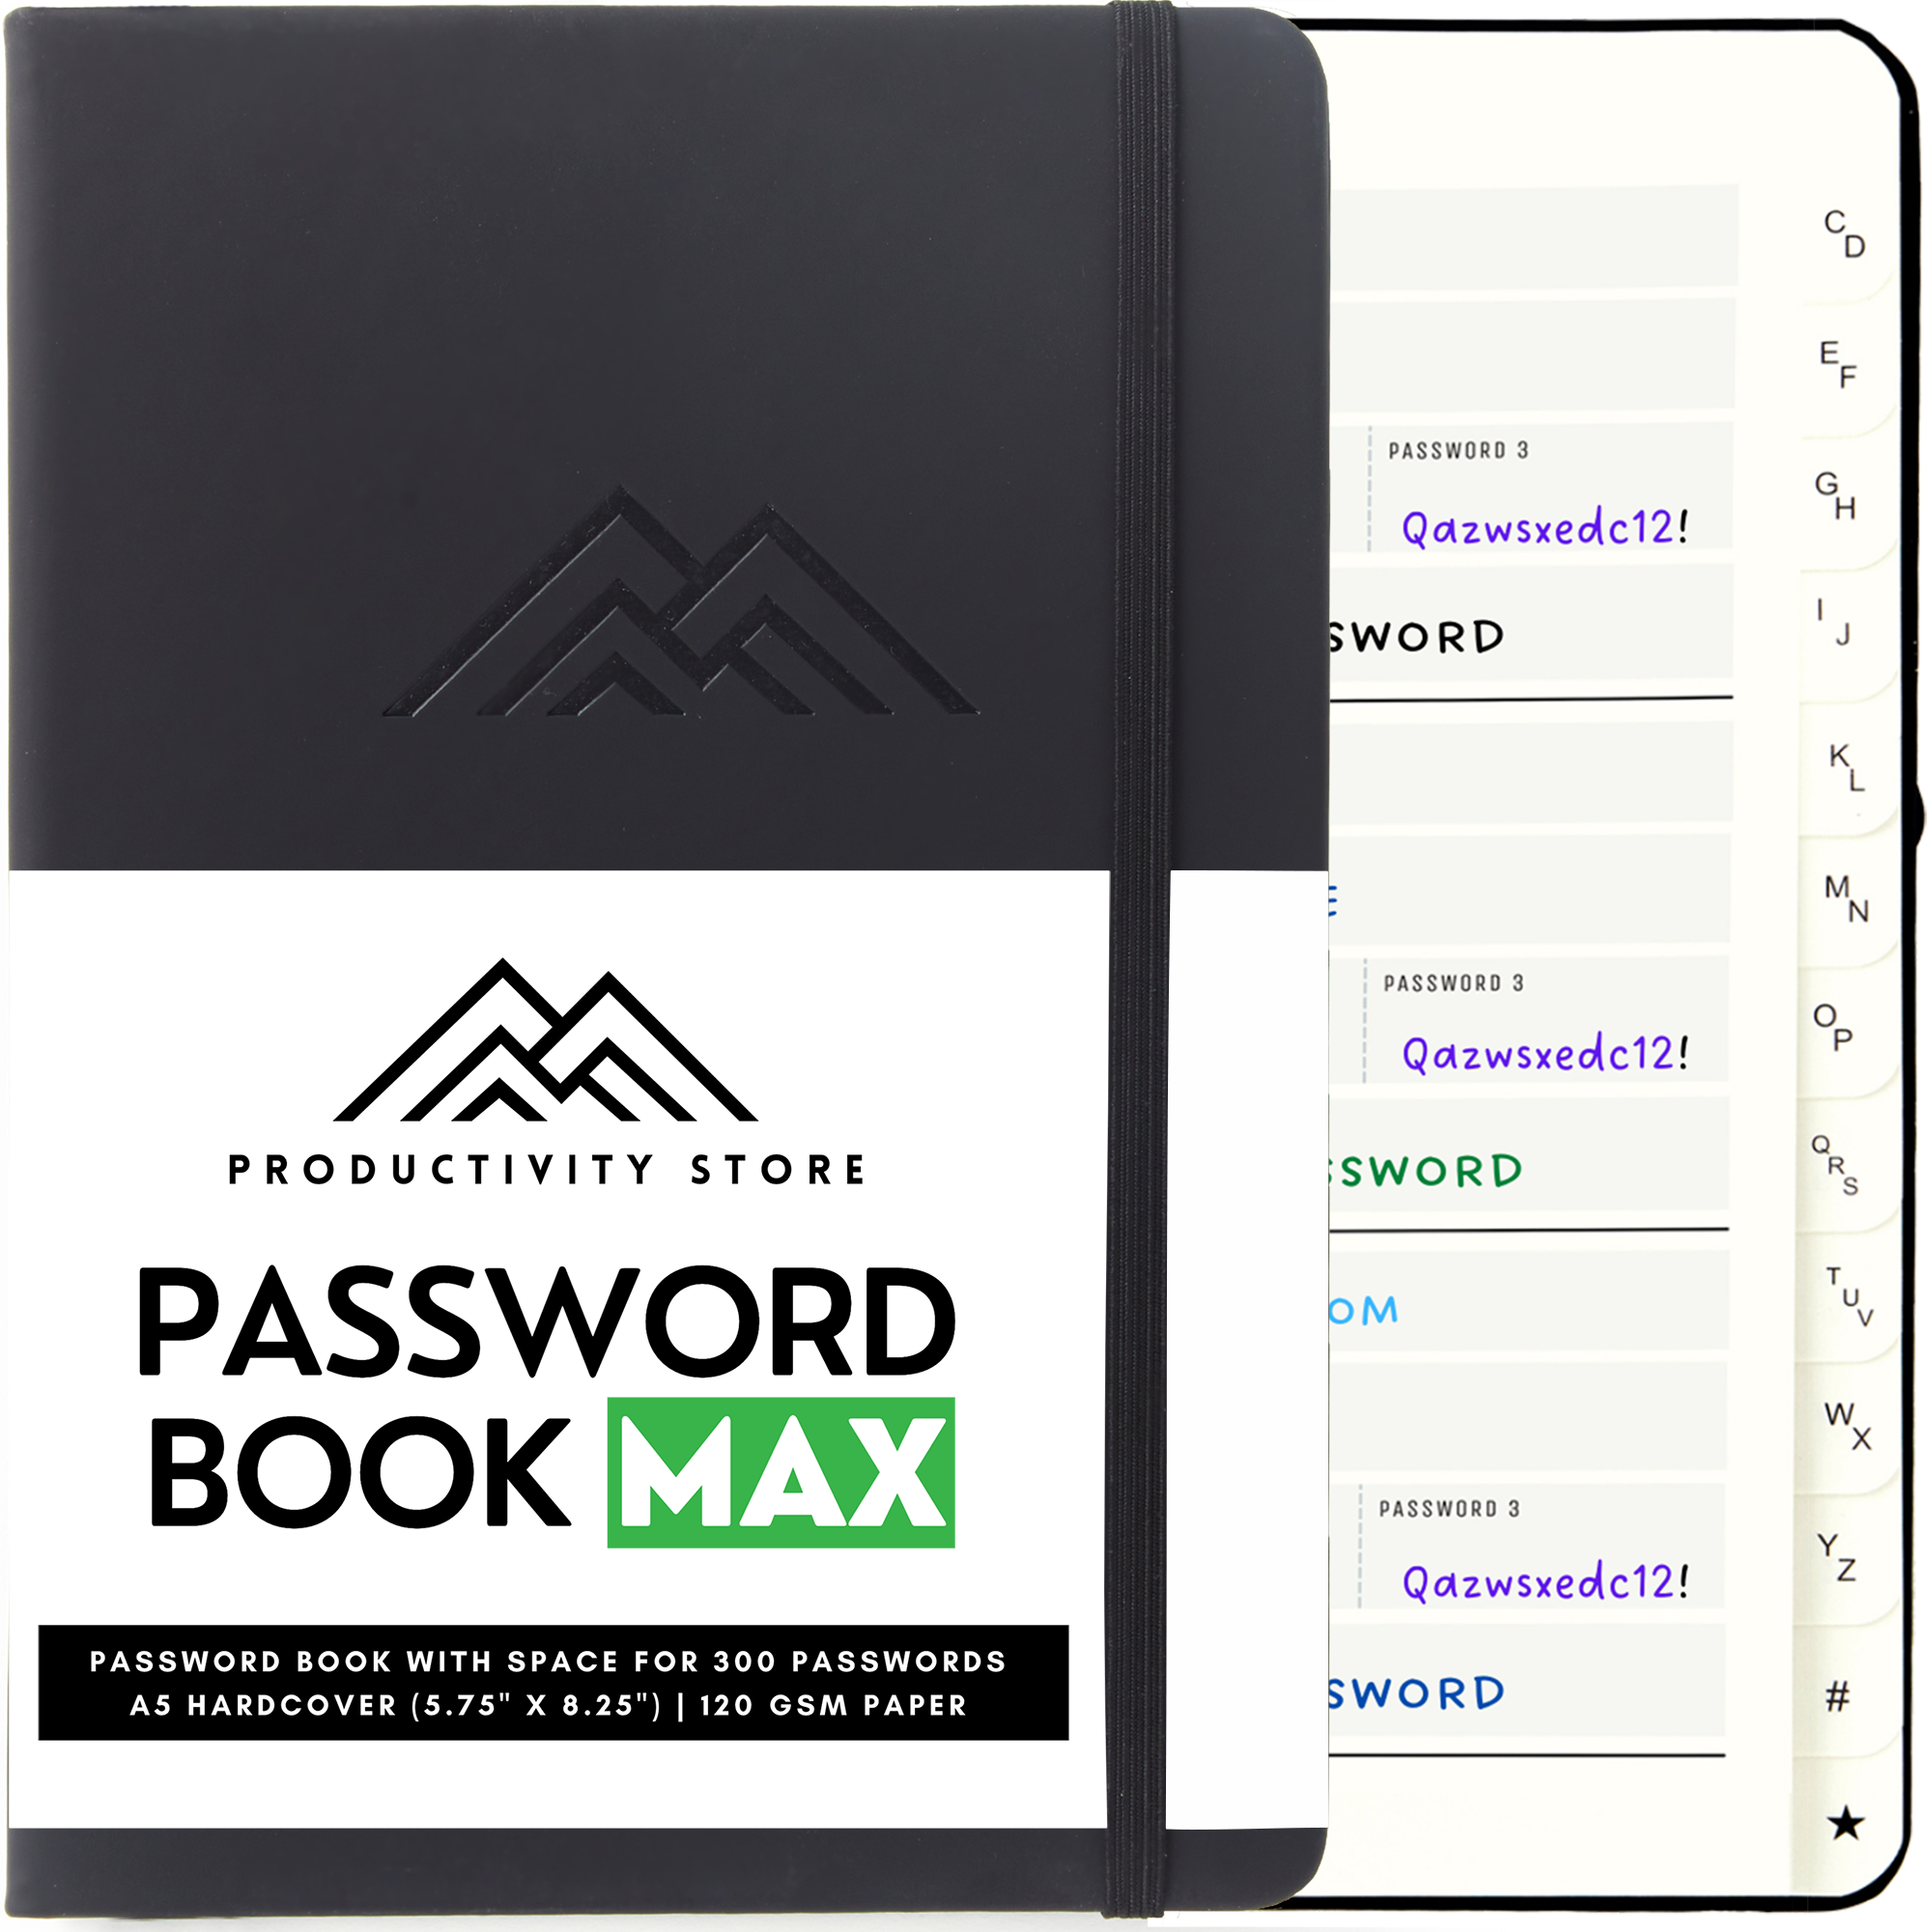 Addressing Common Concerns About Password Books